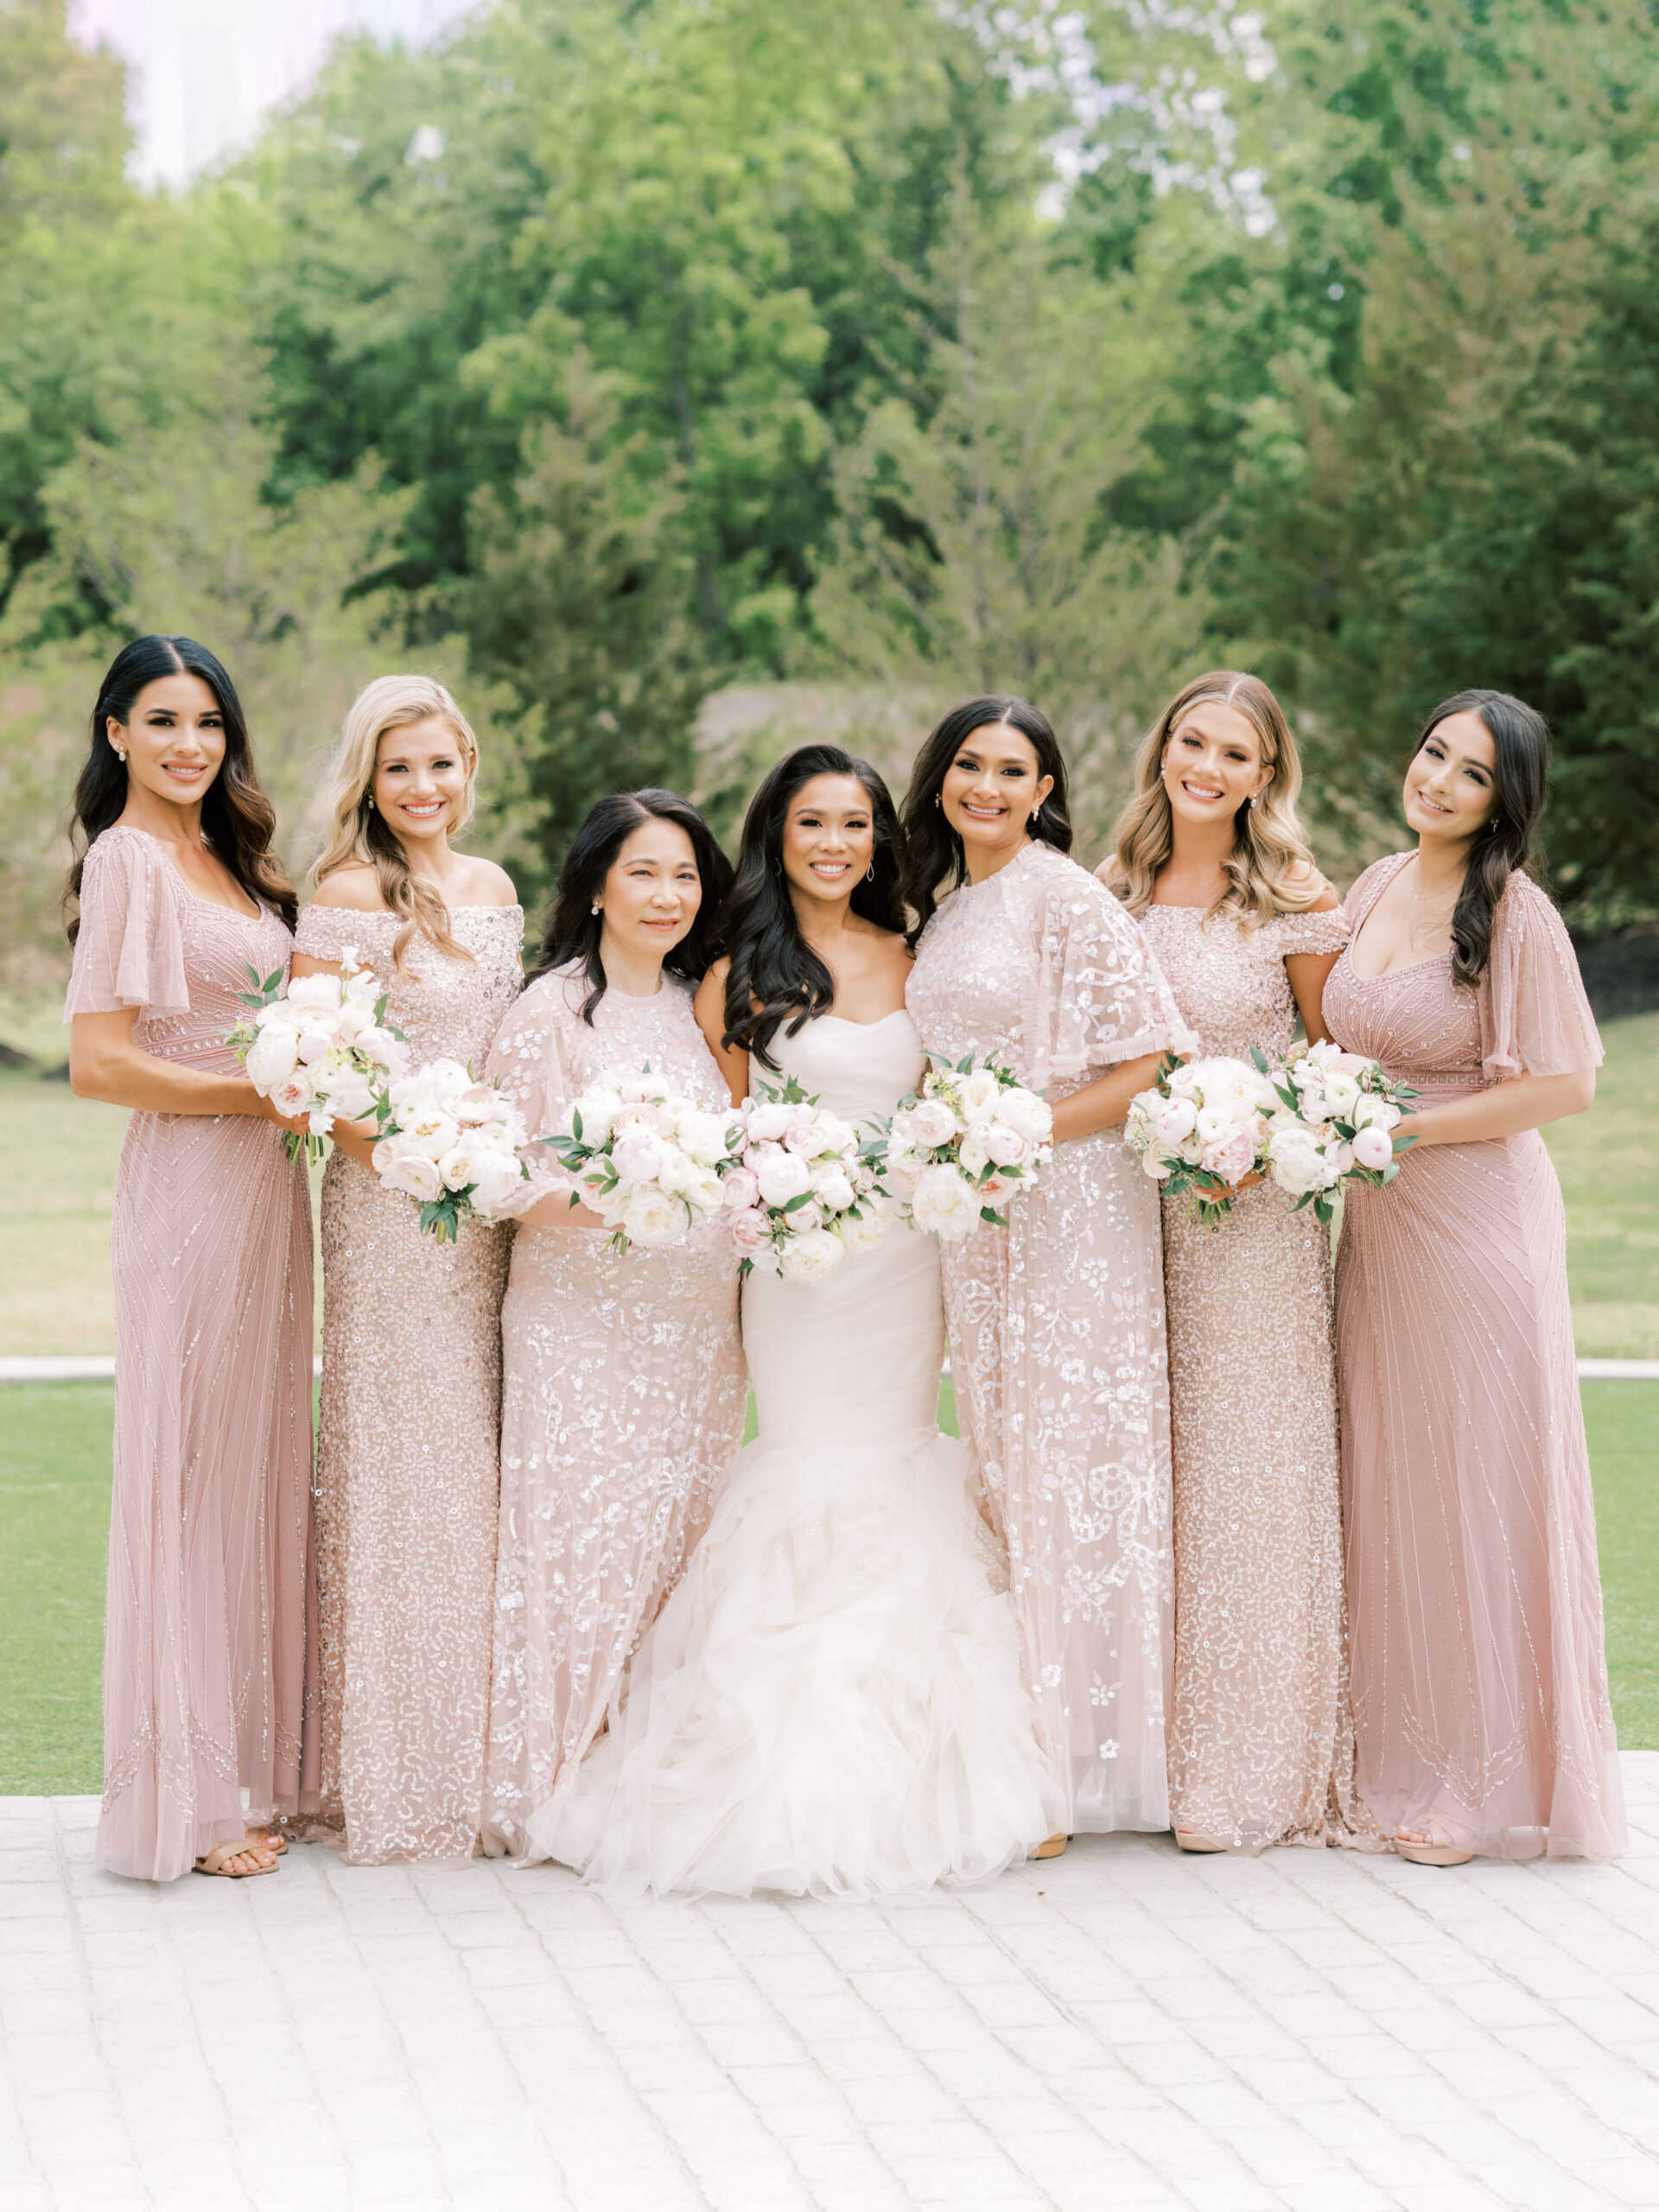 Mismatched Bridesmaid Dresses: How to Master Mix and Match Styles